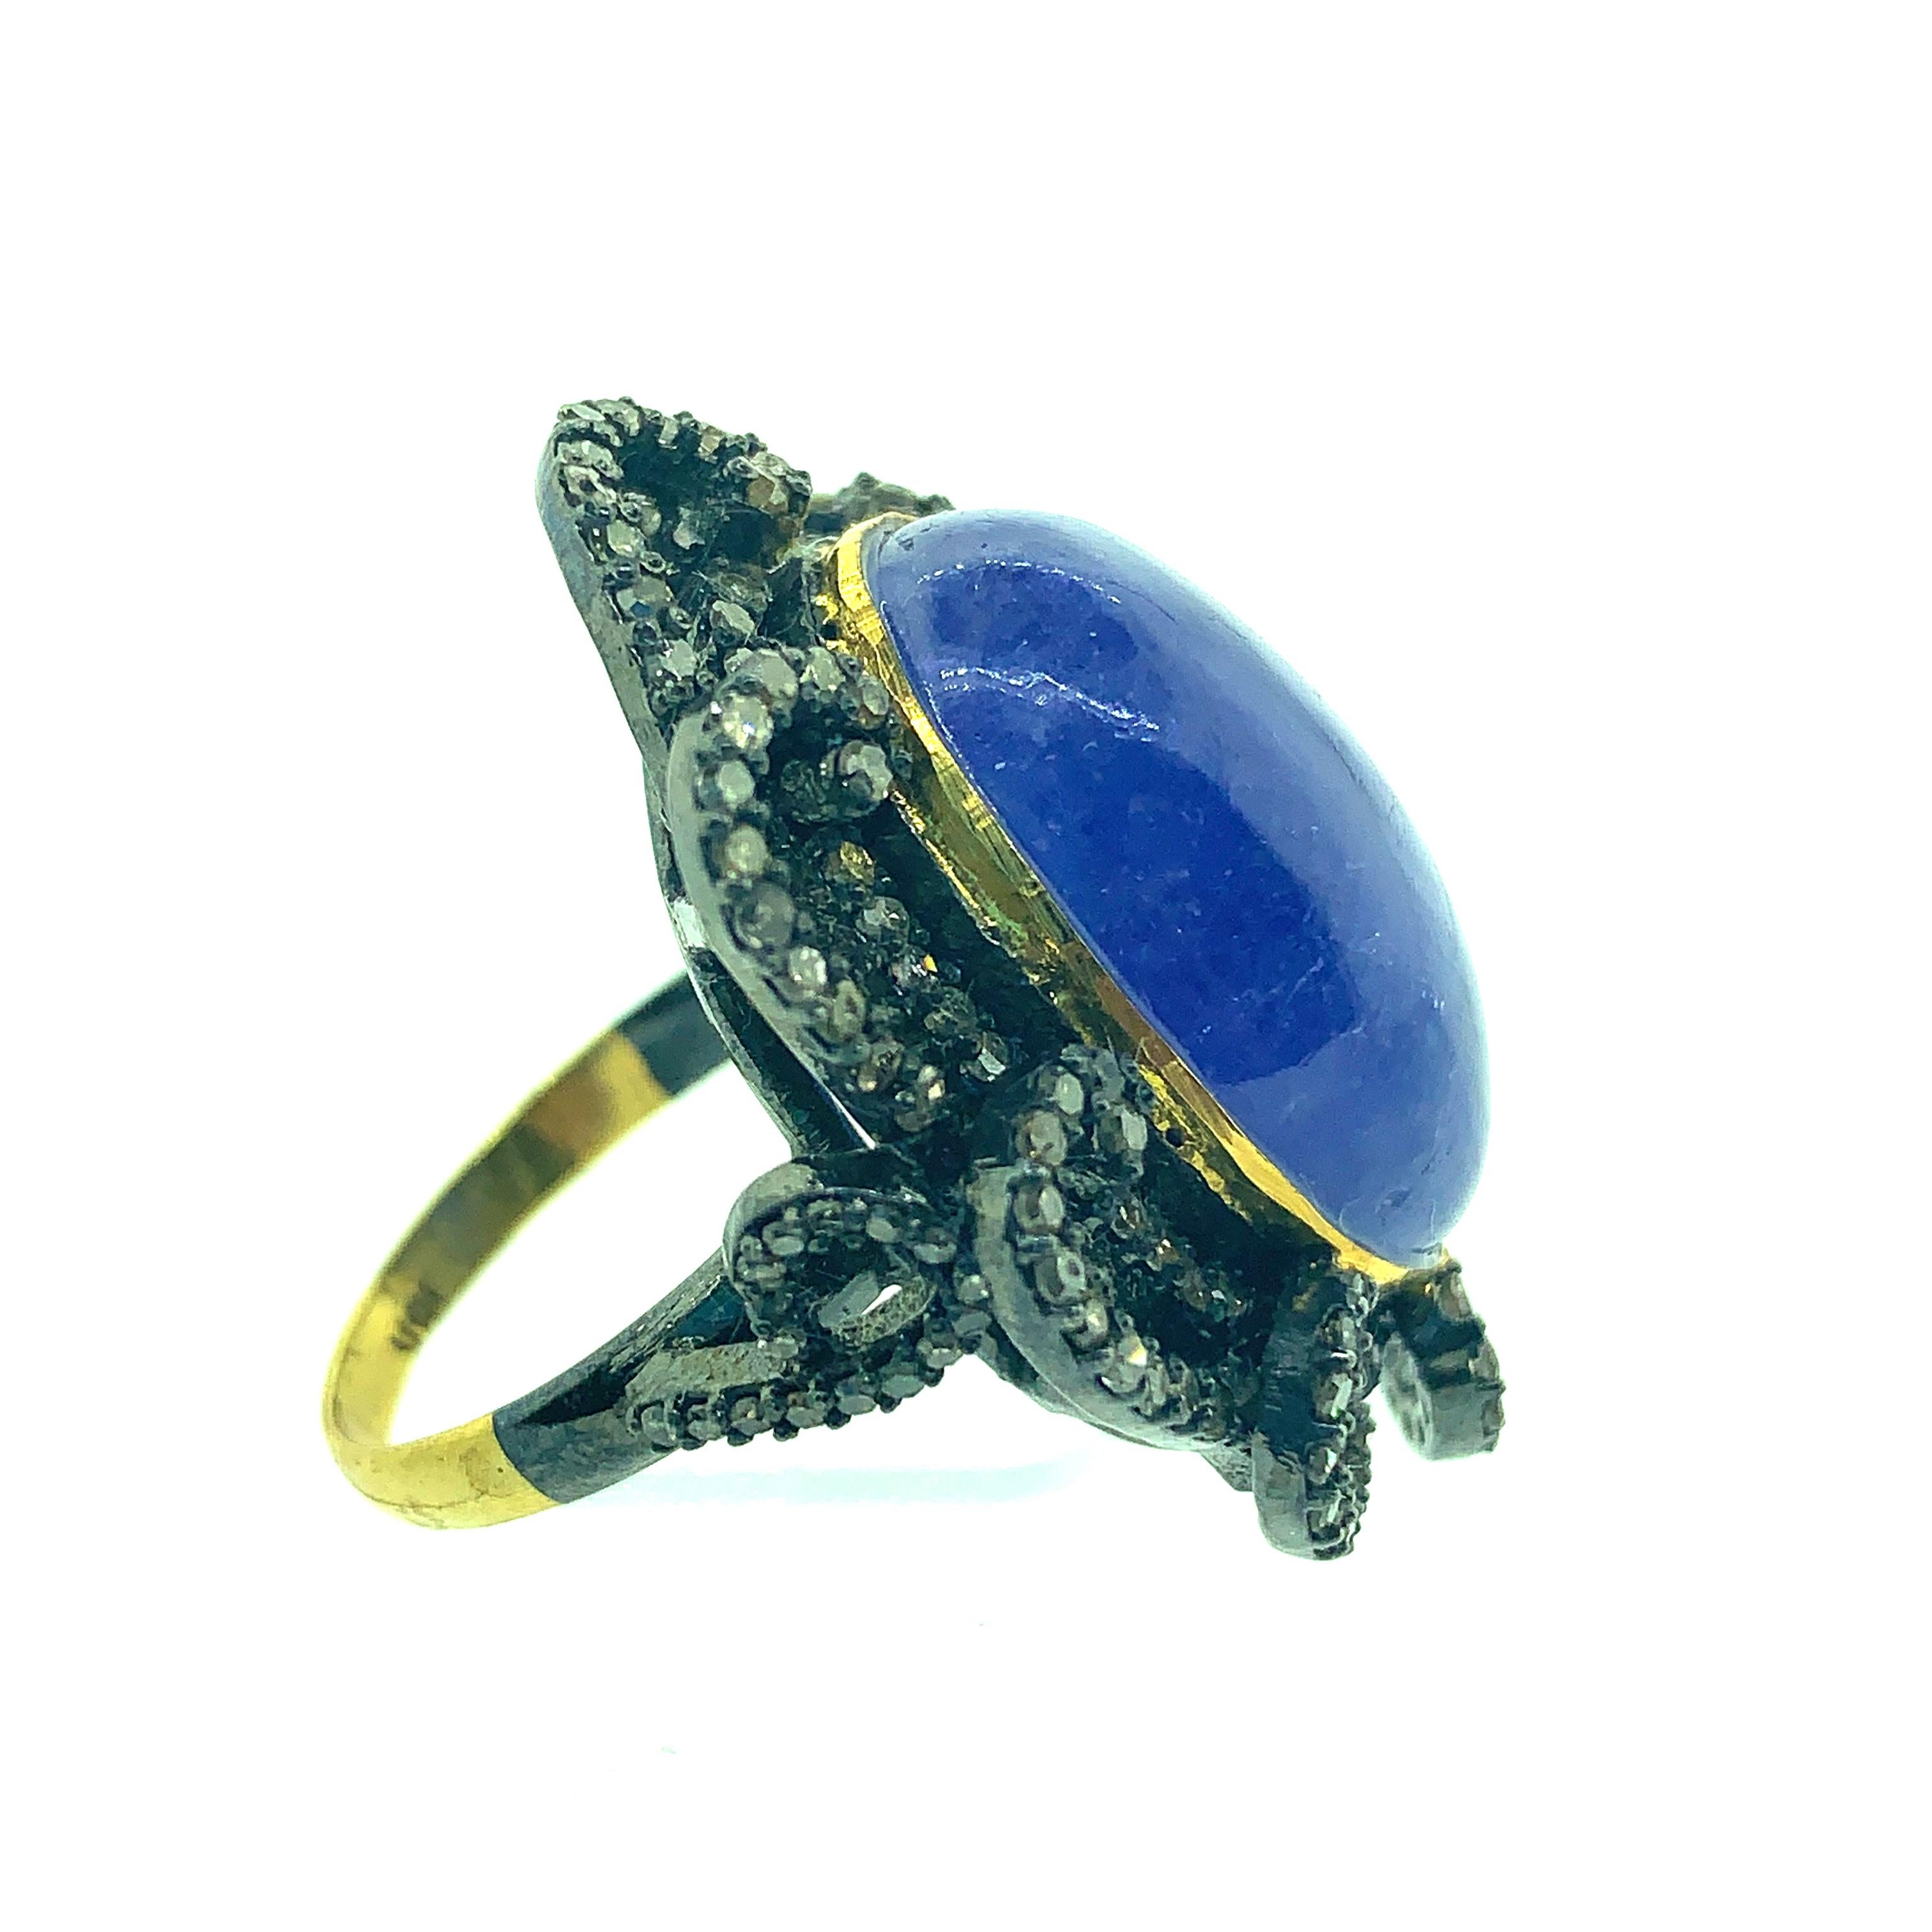 Contemporary 22.05 Carat Tanzanite Diamond Ring in Oxidized Sterling Silver, 18 Karat Gold For Sale